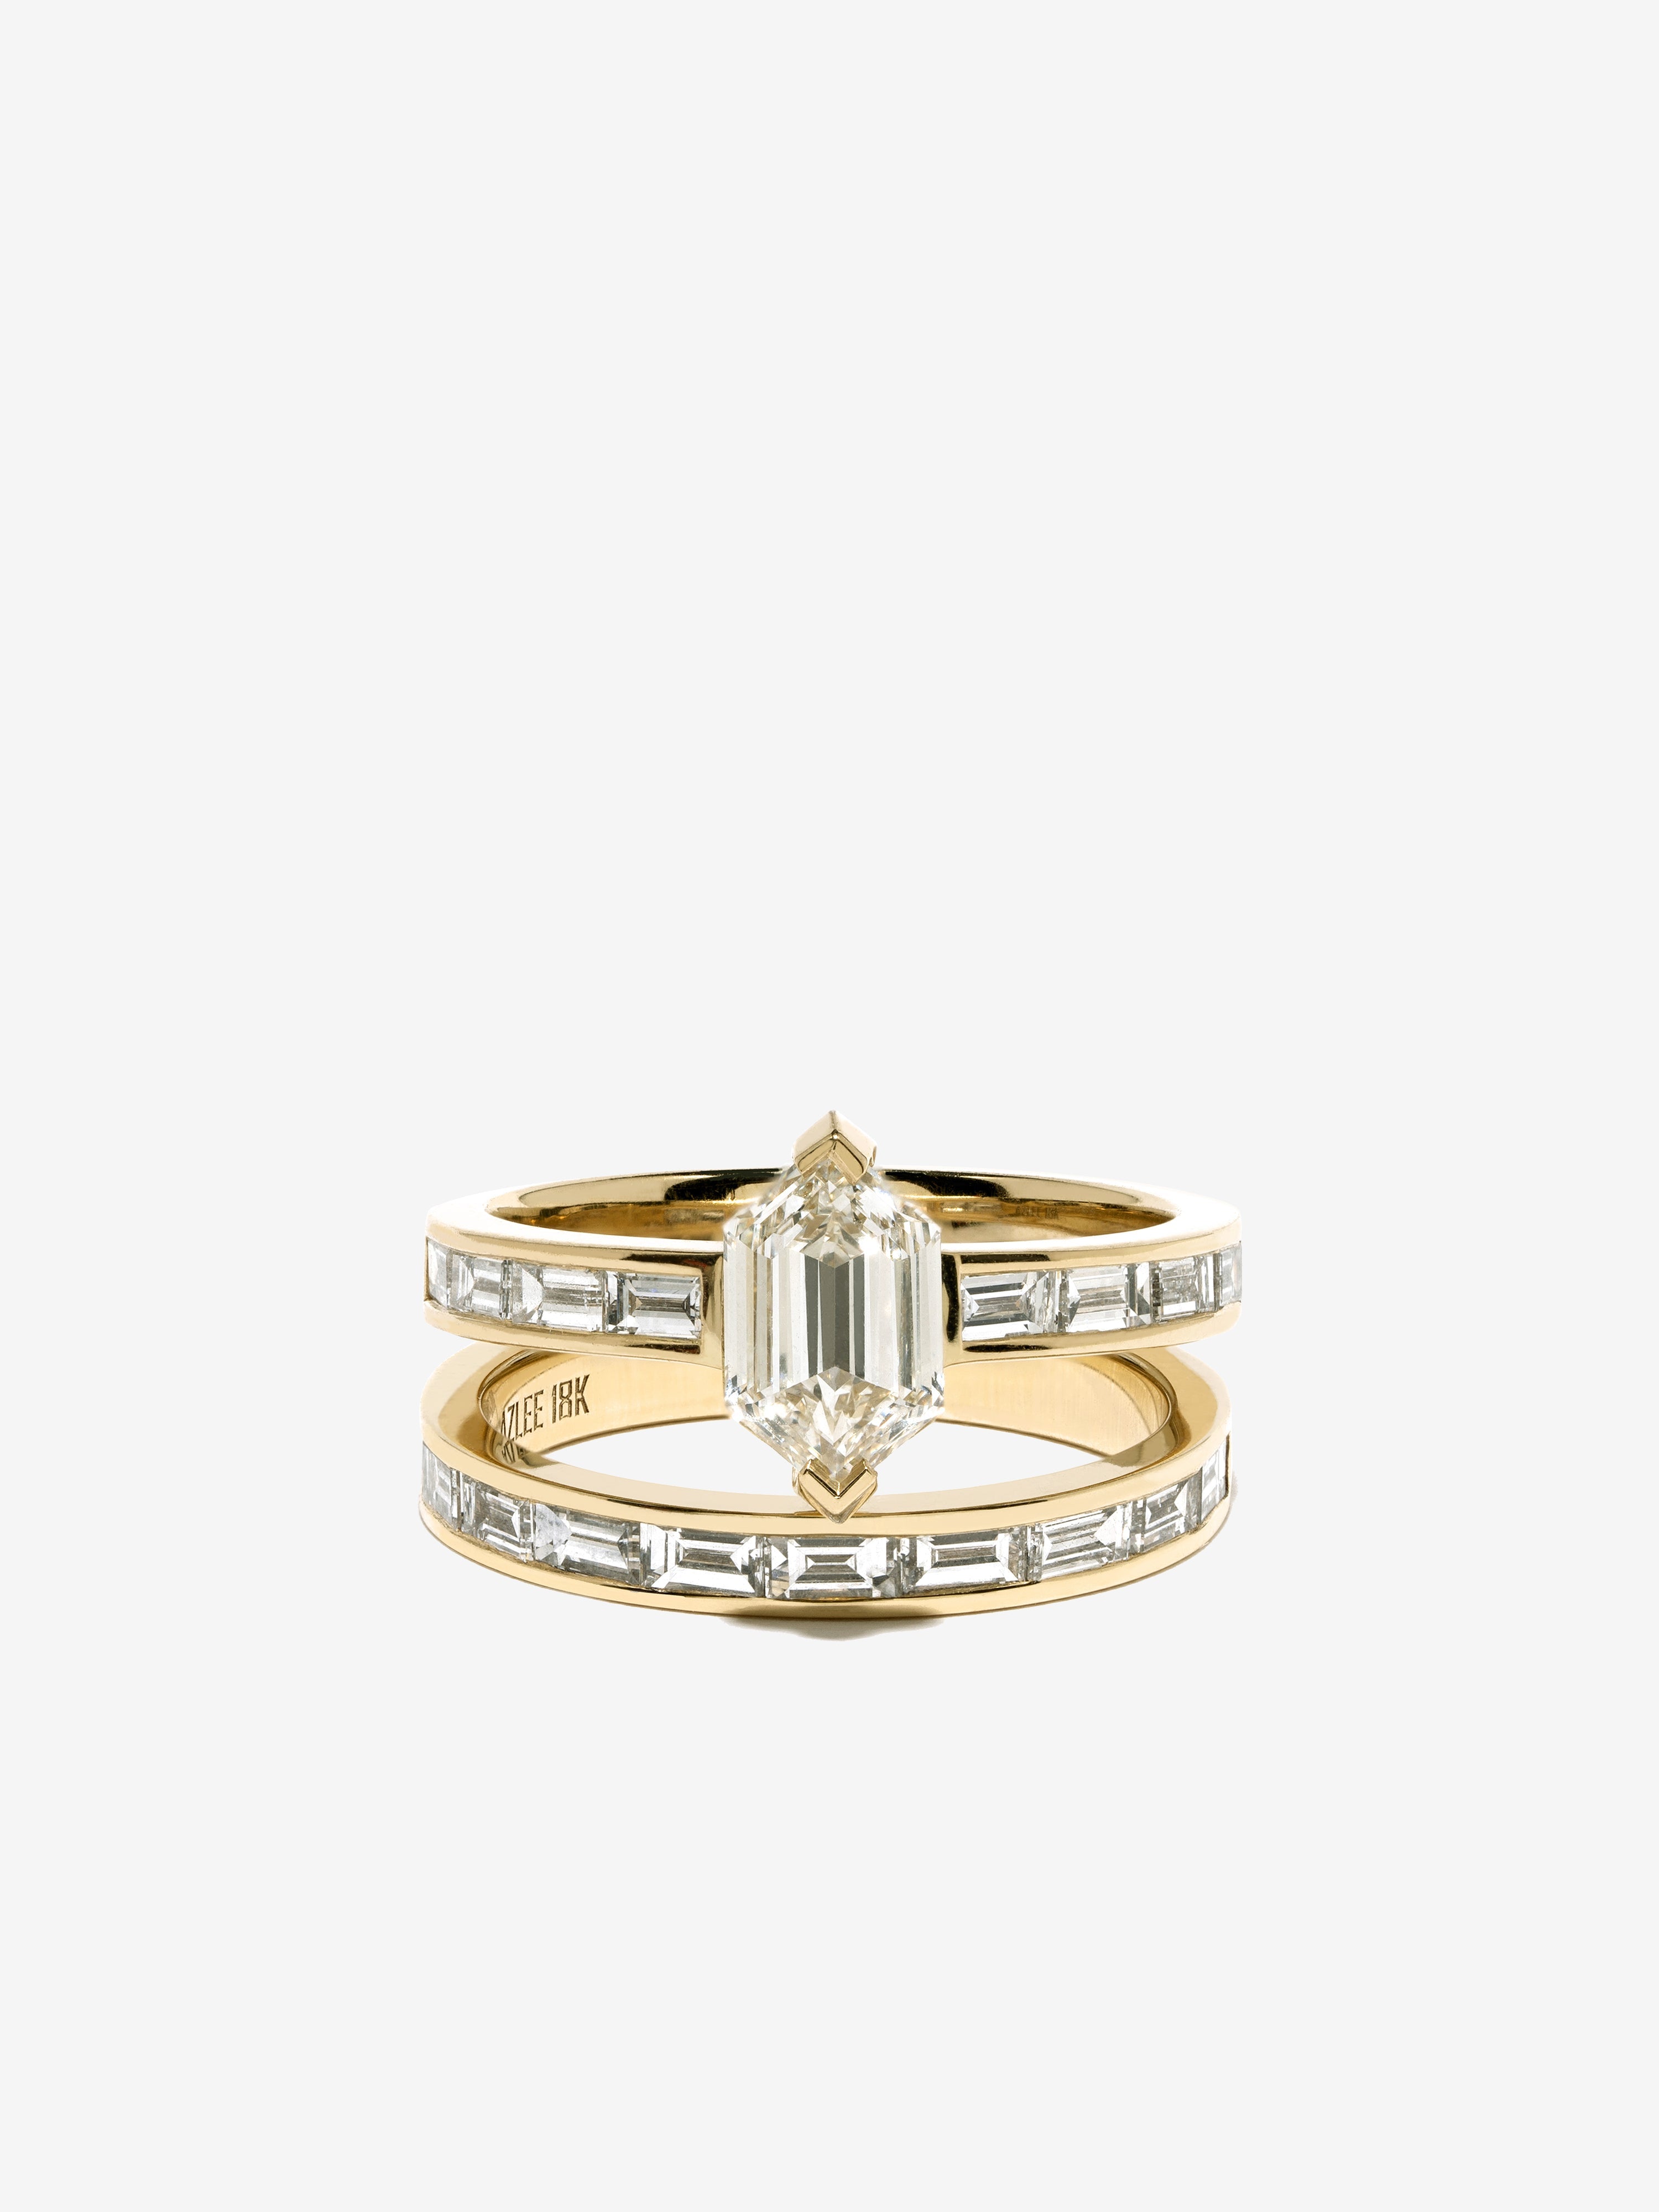 Hexagon Diamond Ring in Prongs with Baguette Setting Paired with Baguette Band